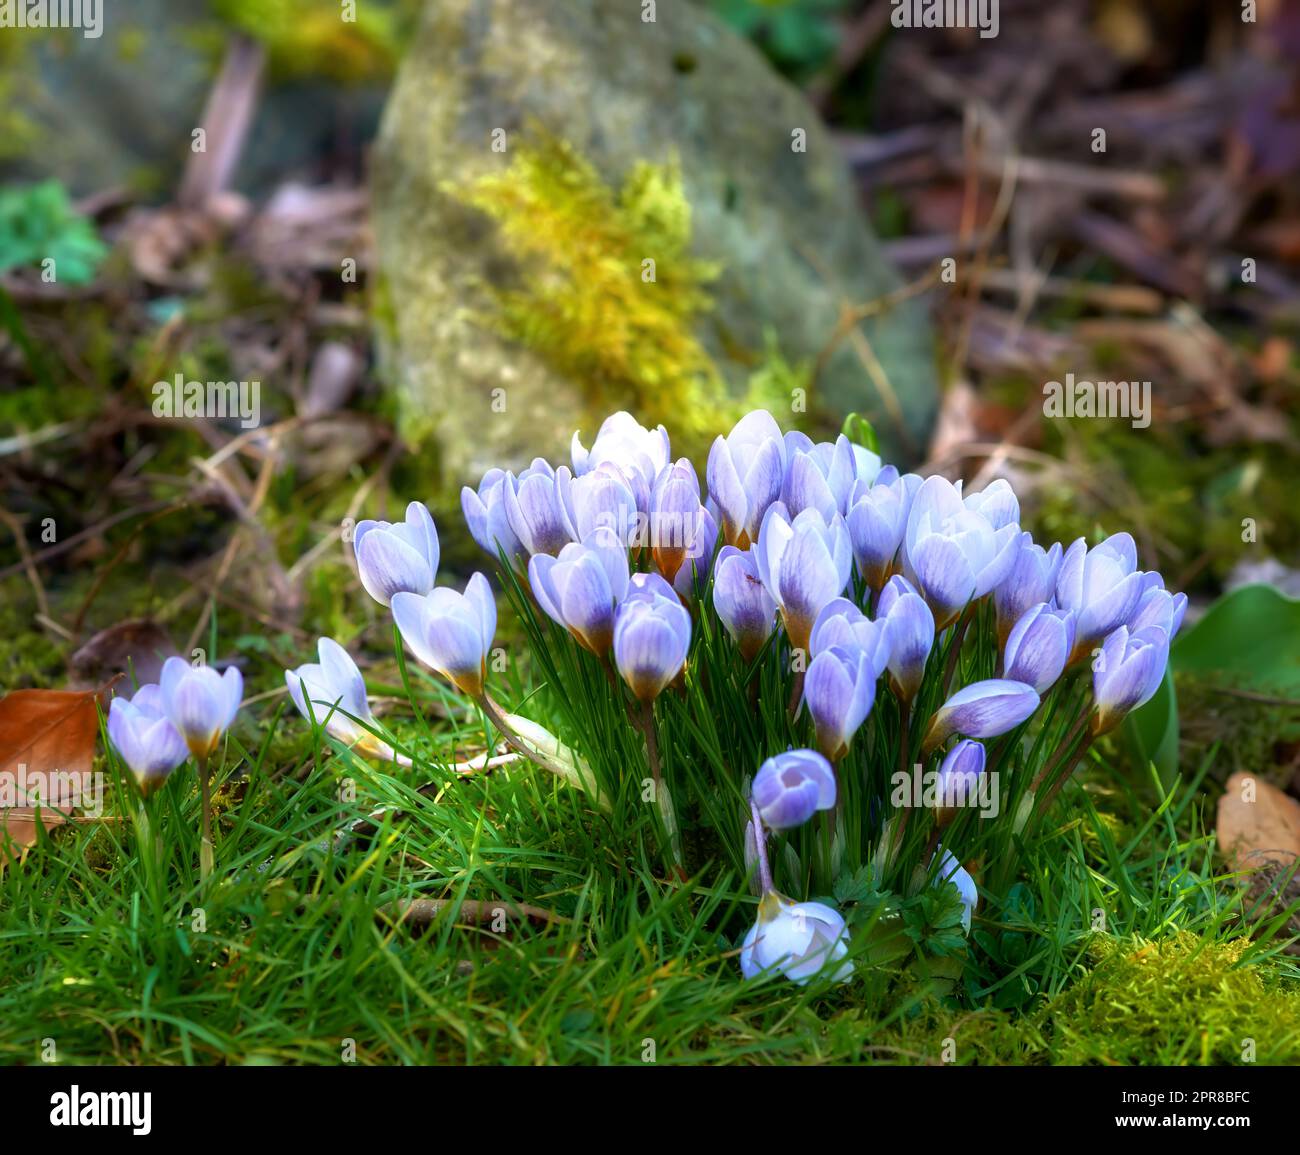 Beautiful crocus blooming in forest on a sunny day. Illuminated purple flowers symbolizing rebirth and romantic devotion. Blossoming wild plant growing in the woods surrounded by vibrant grass Stock Photo